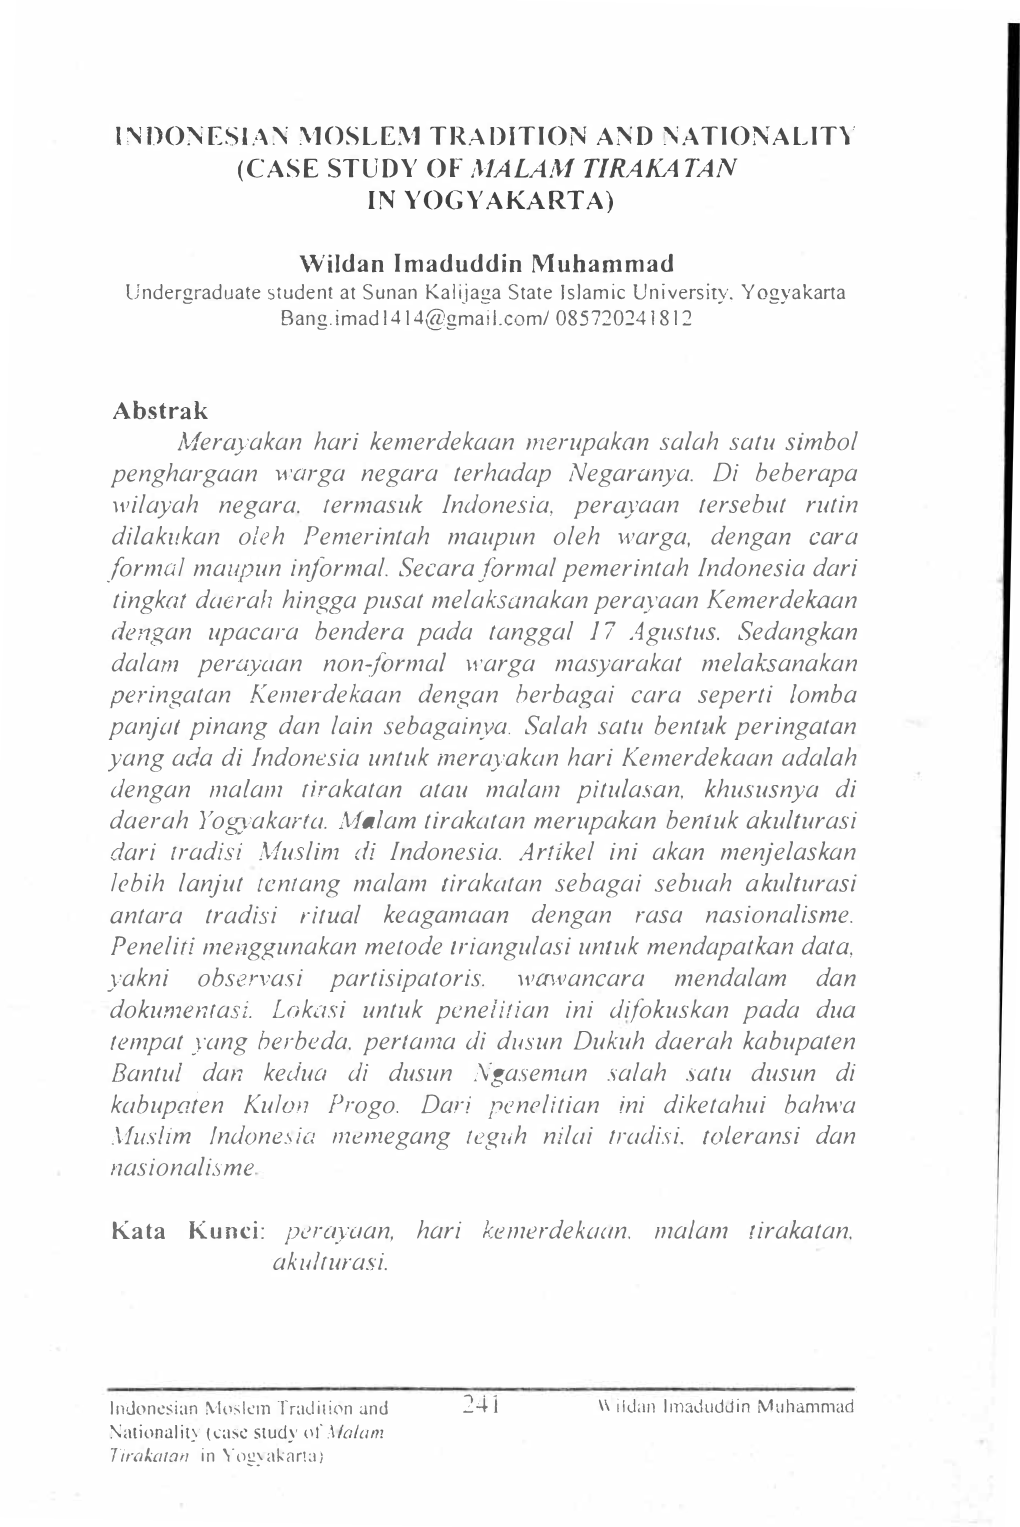 Indonesia Moslem Tradition and Nationality